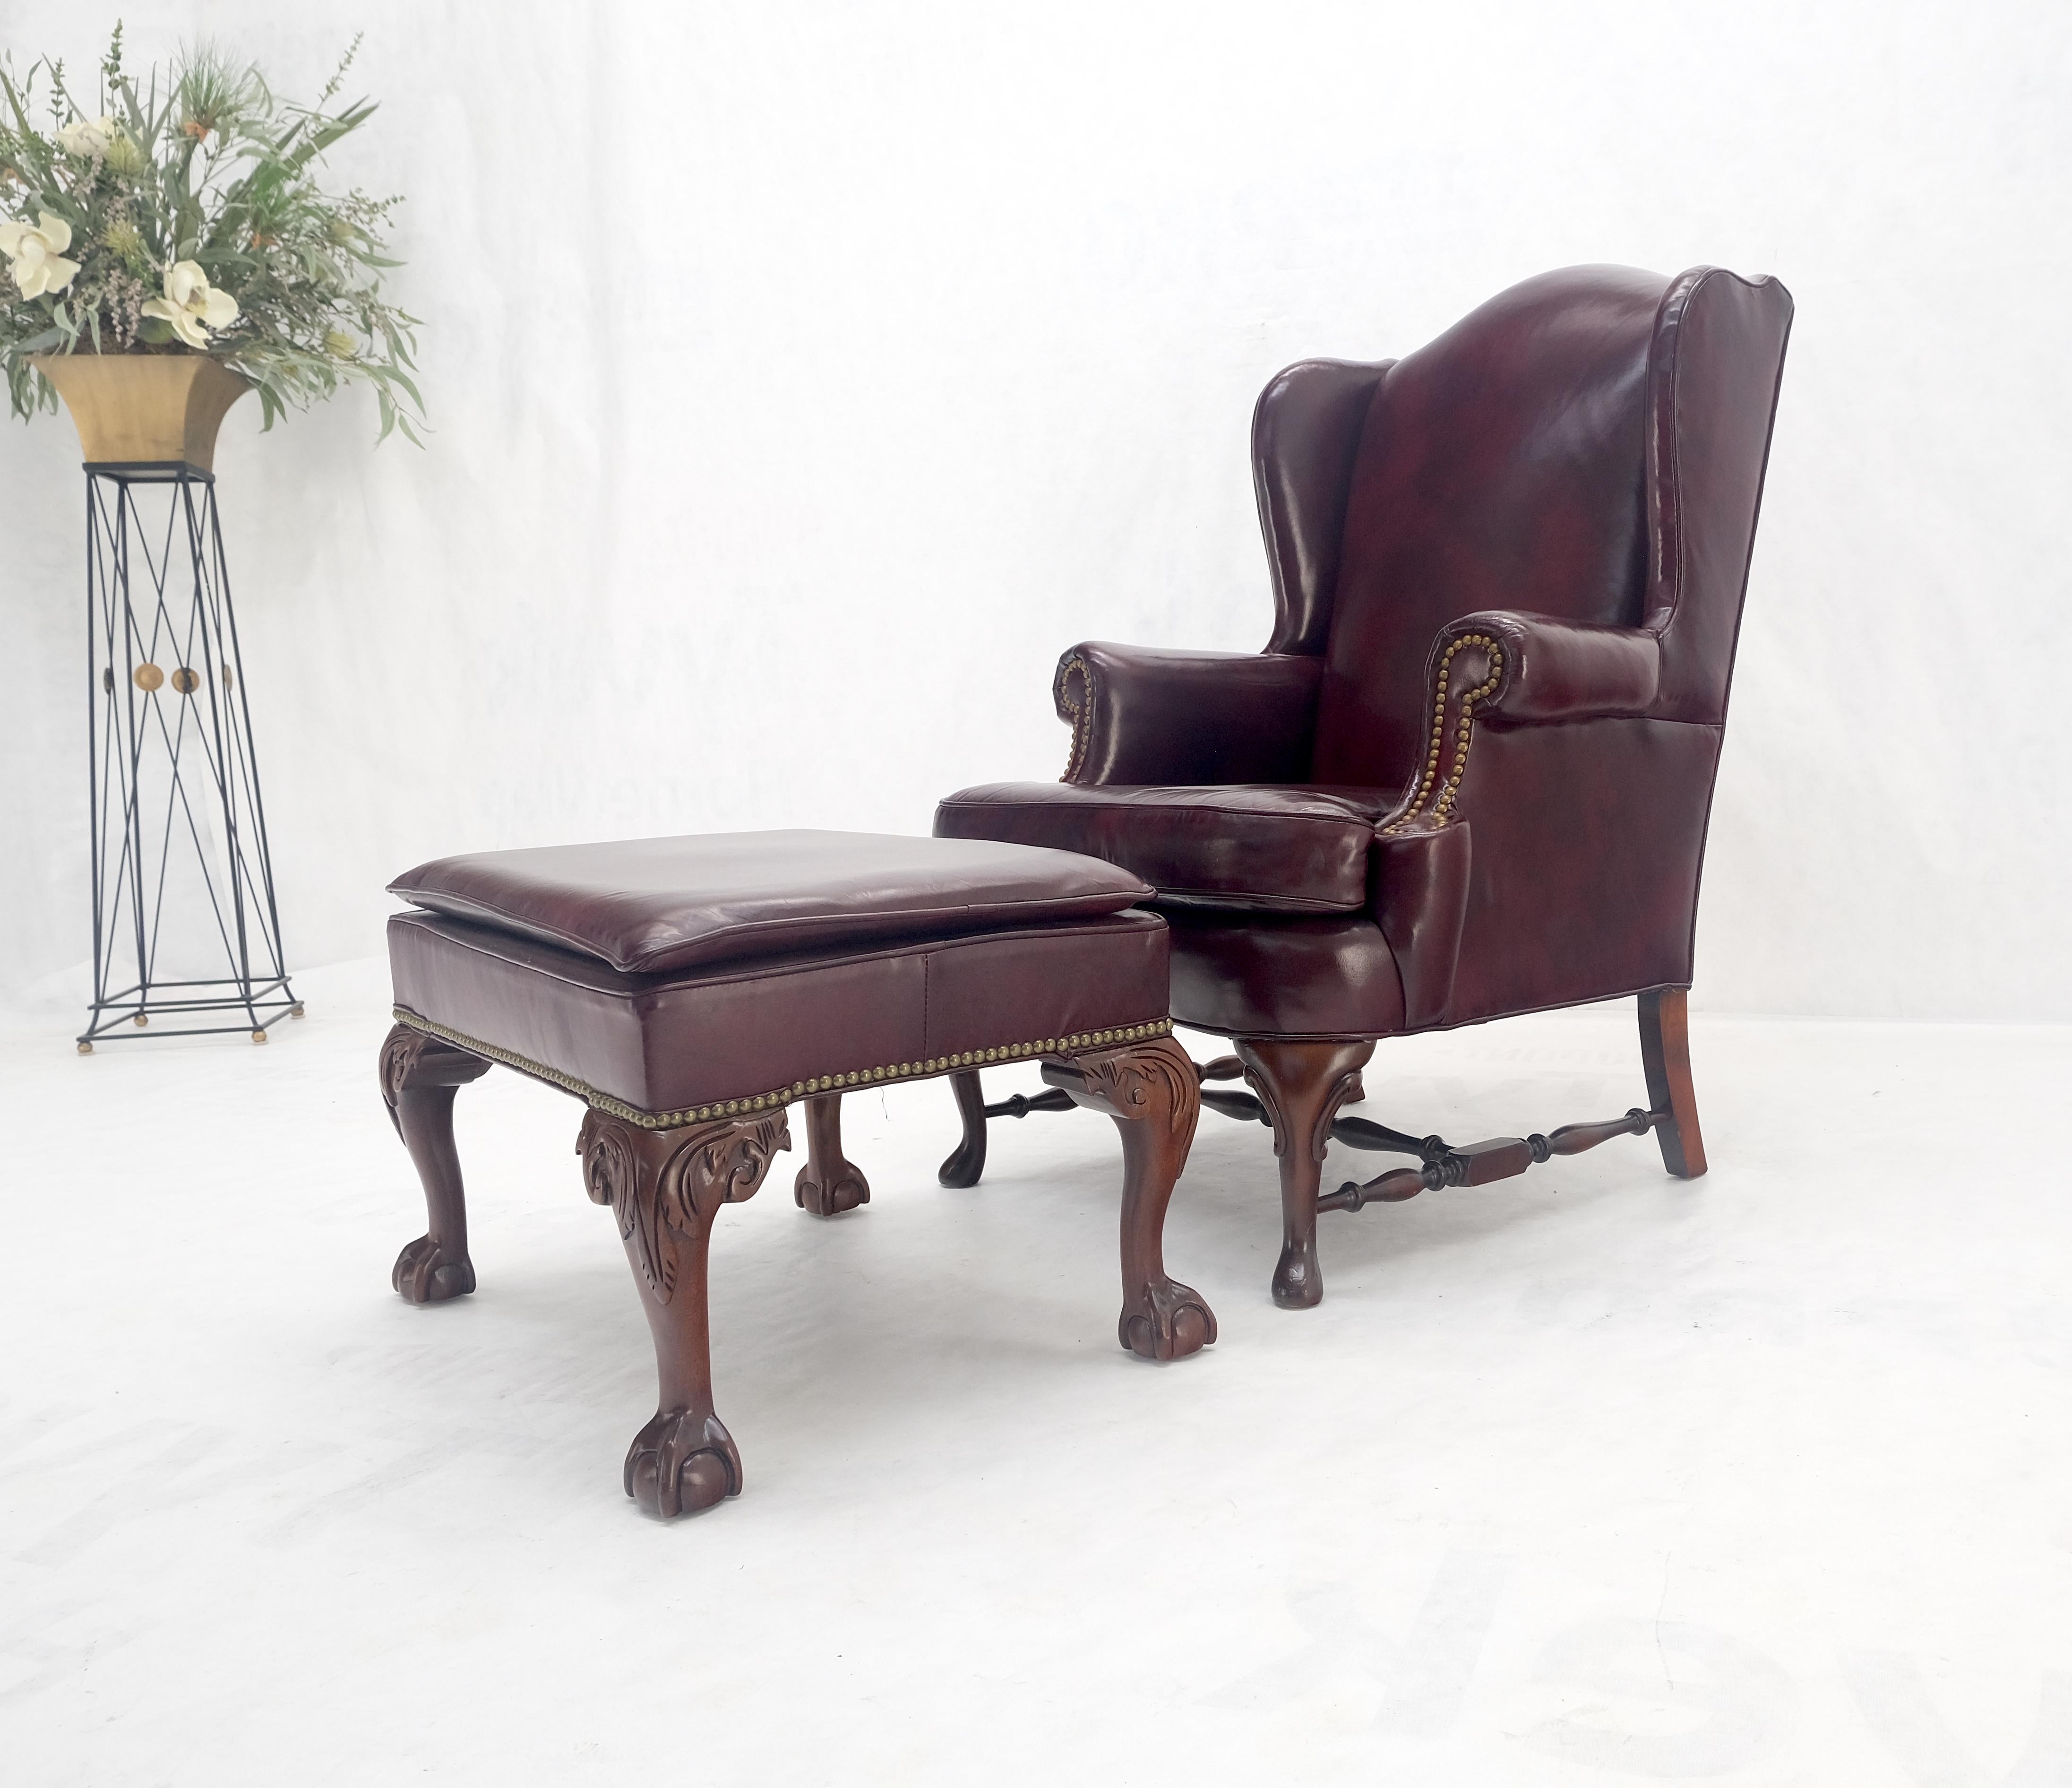 Chippendale Kindel Burgundy Leather Upholstery Carved Mahogany Legs Wingback Chair & Ottoman For Sale